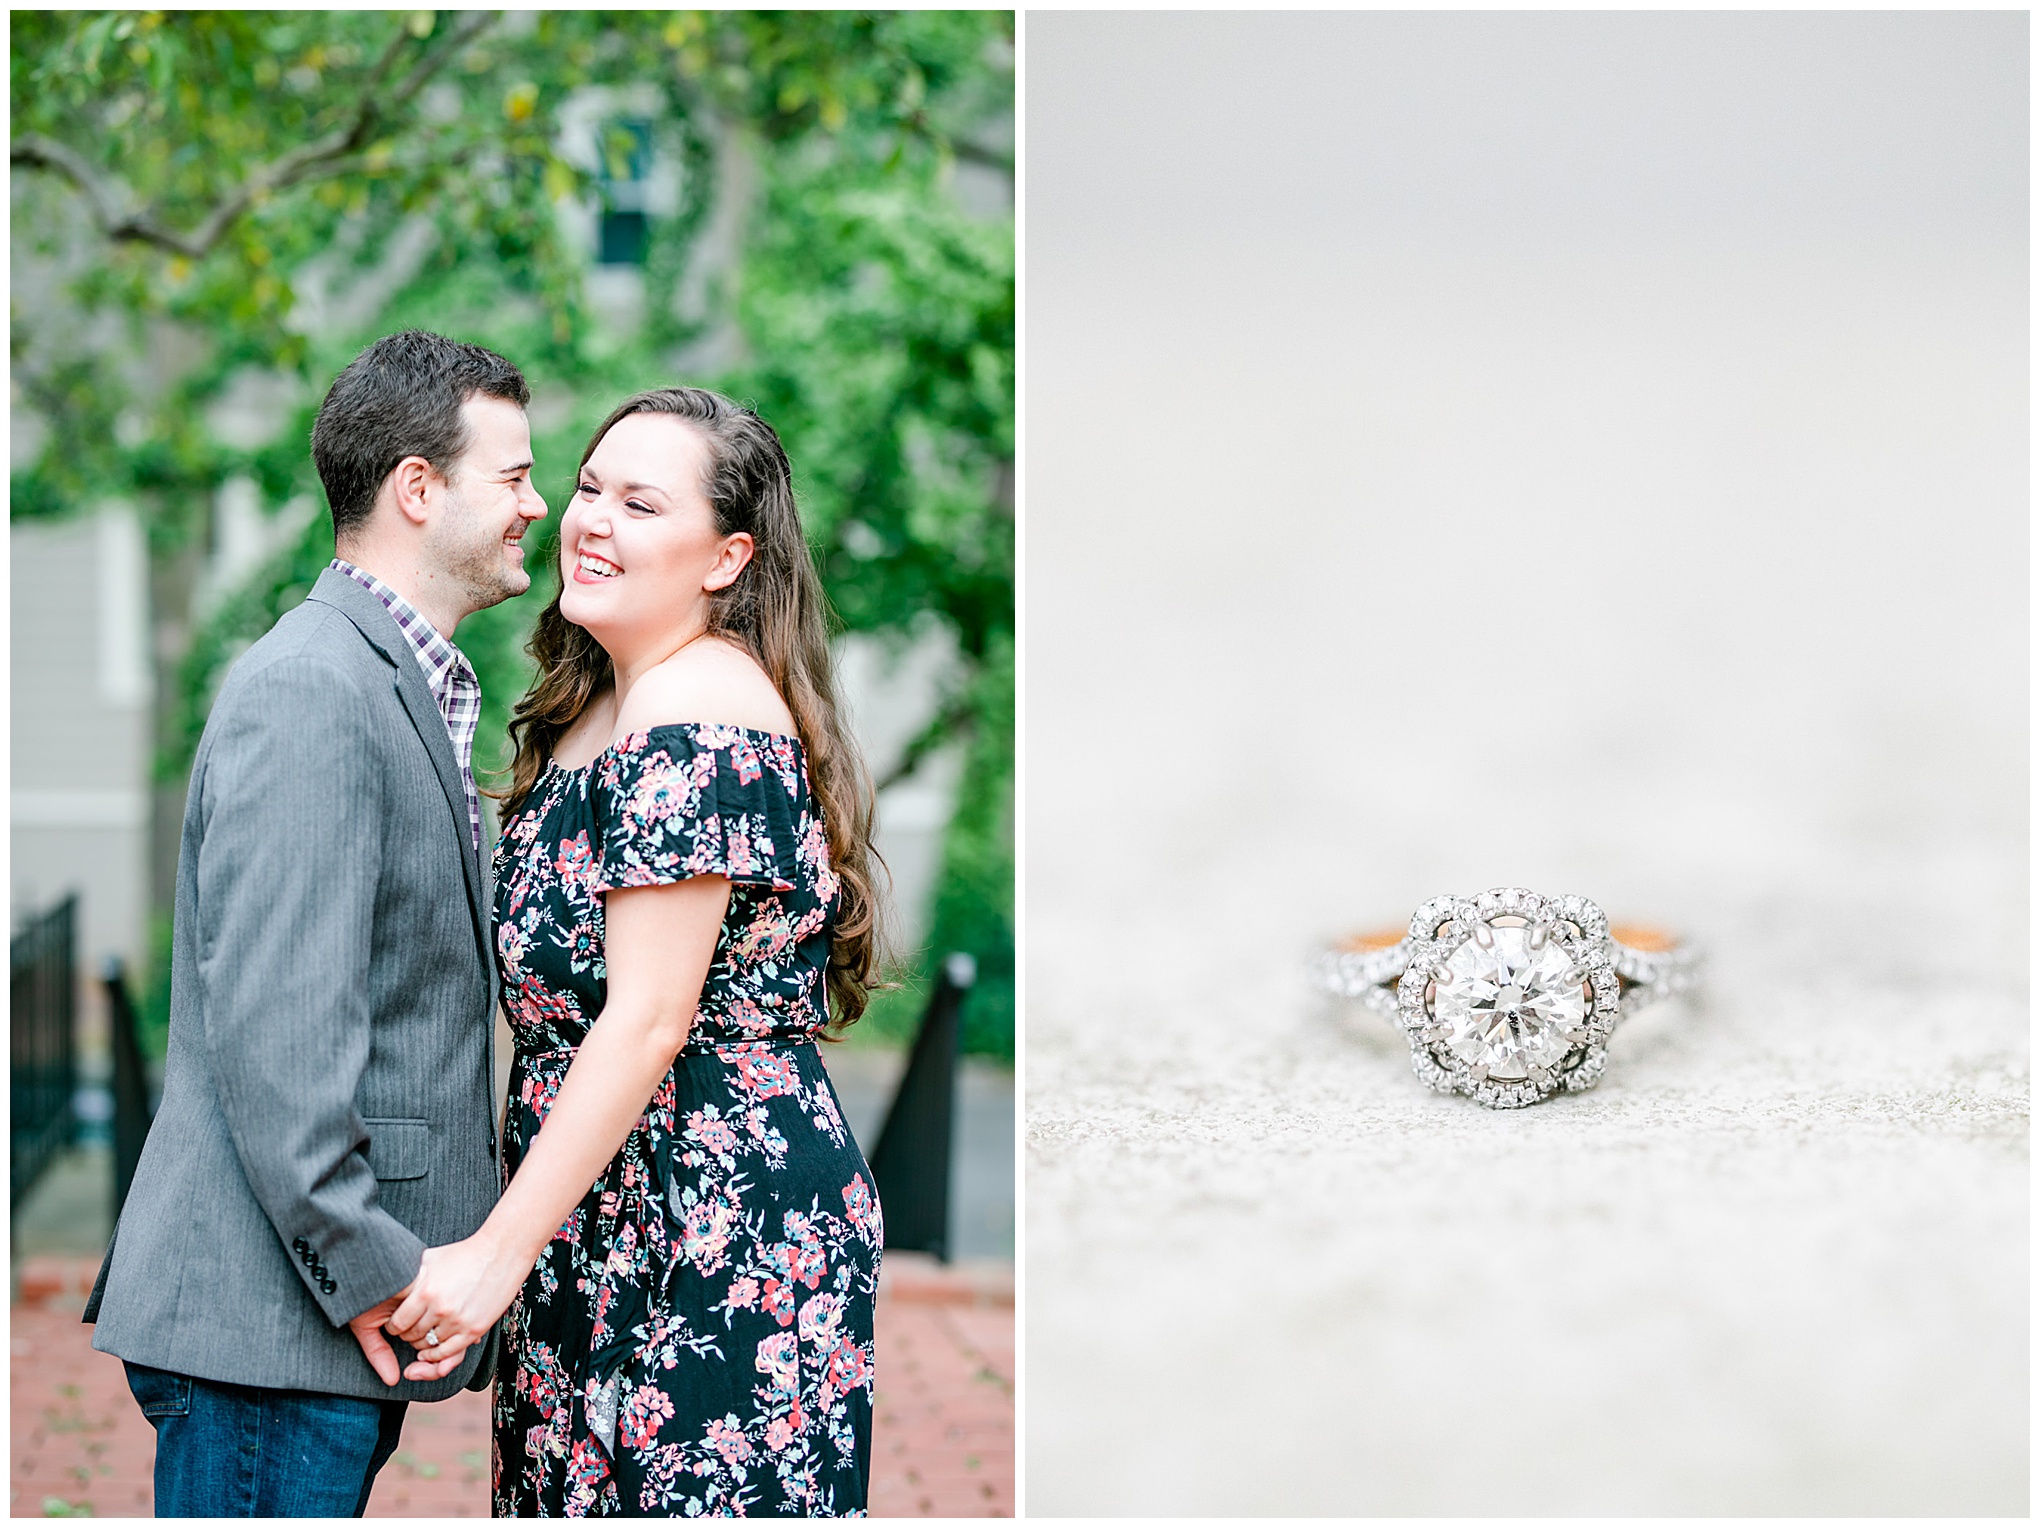 Georgetown DC engagement photos, Washington DC wedding photographer, Washington DC photographer, Rachel E.H. Photography, REHP love birds, casual engagement photos, summer engagement photos, outdoor engagement photos, natural light engagement photos, historic DC engagement photos, Tacori style engagement ring